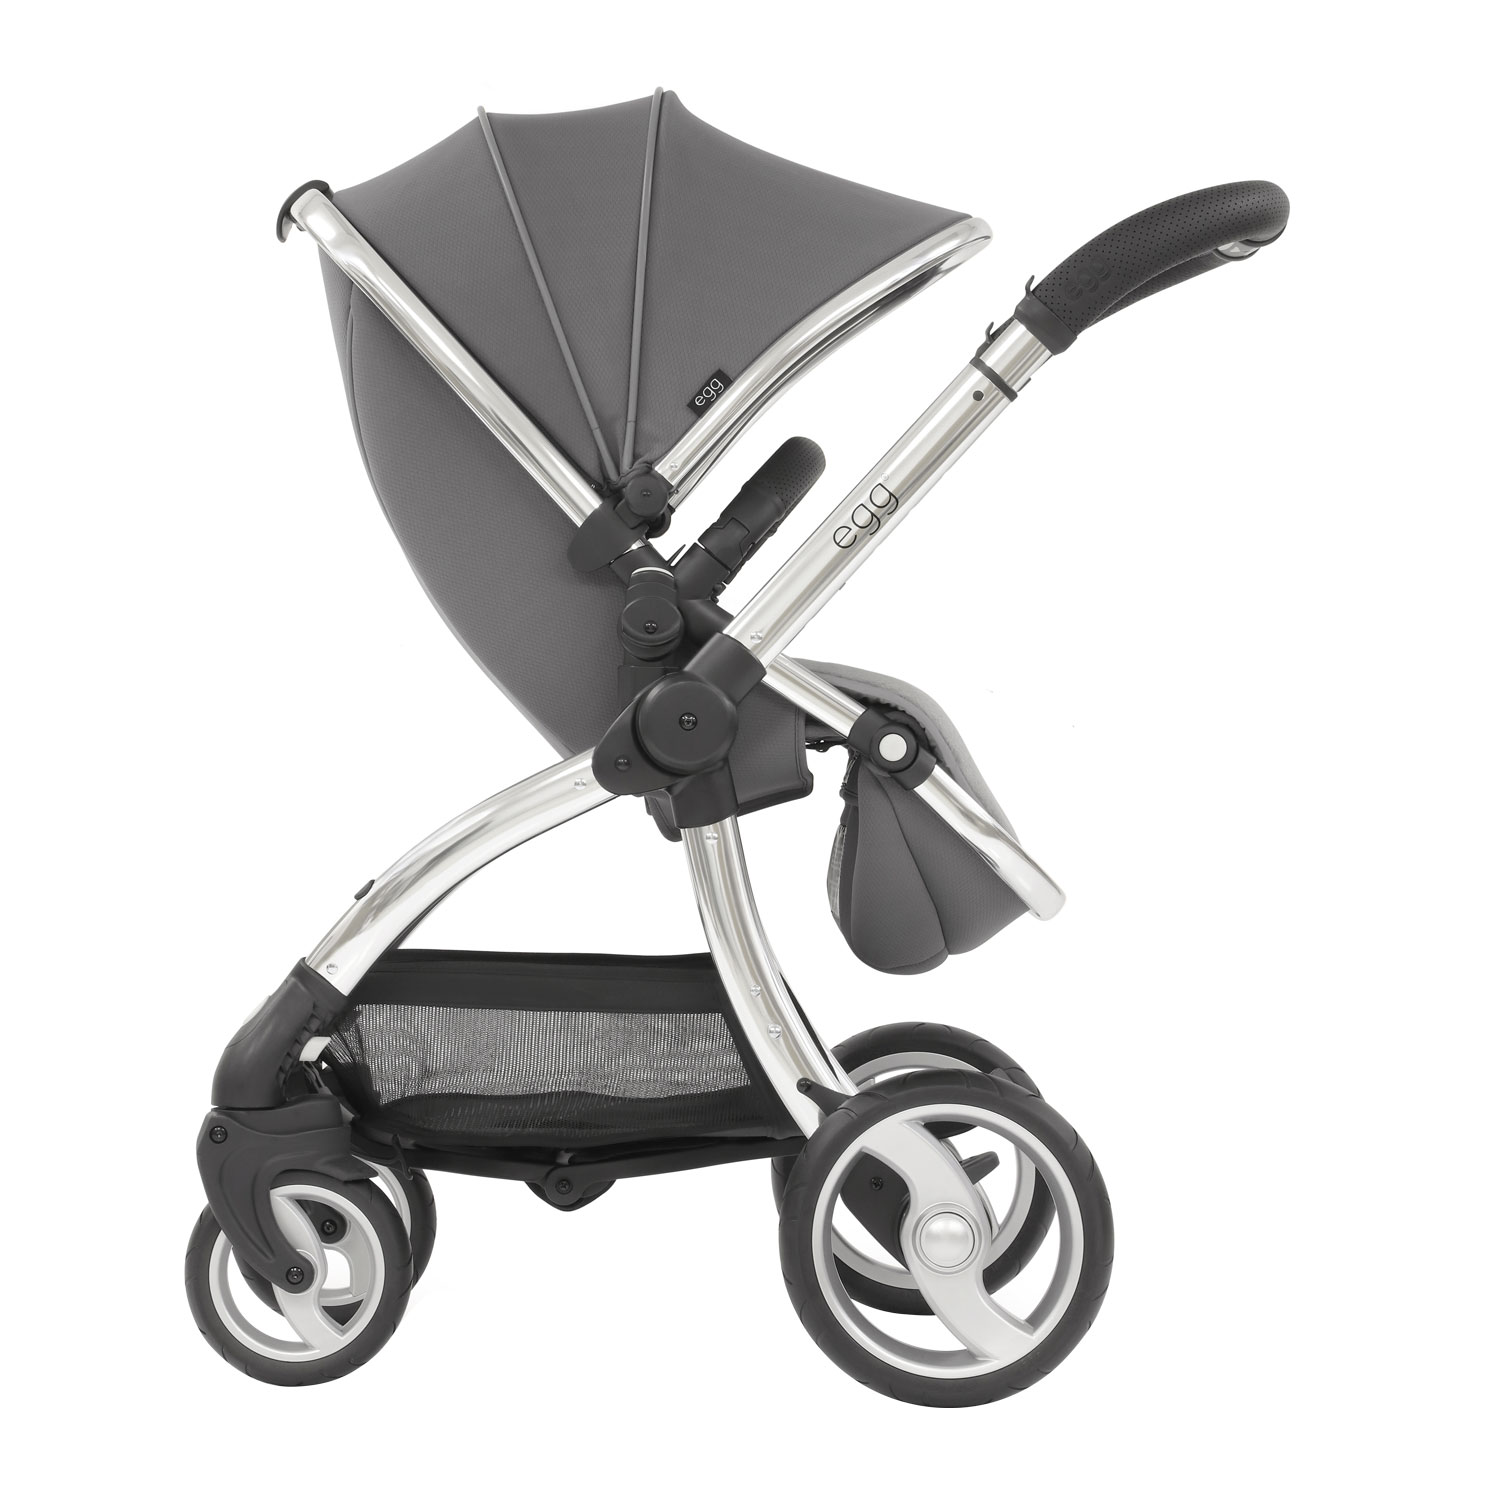 Коляска egg Stroller Anthracite & Chrome Chassis велоноски accapi cycling touch black anthracite 2022 h1008 9966